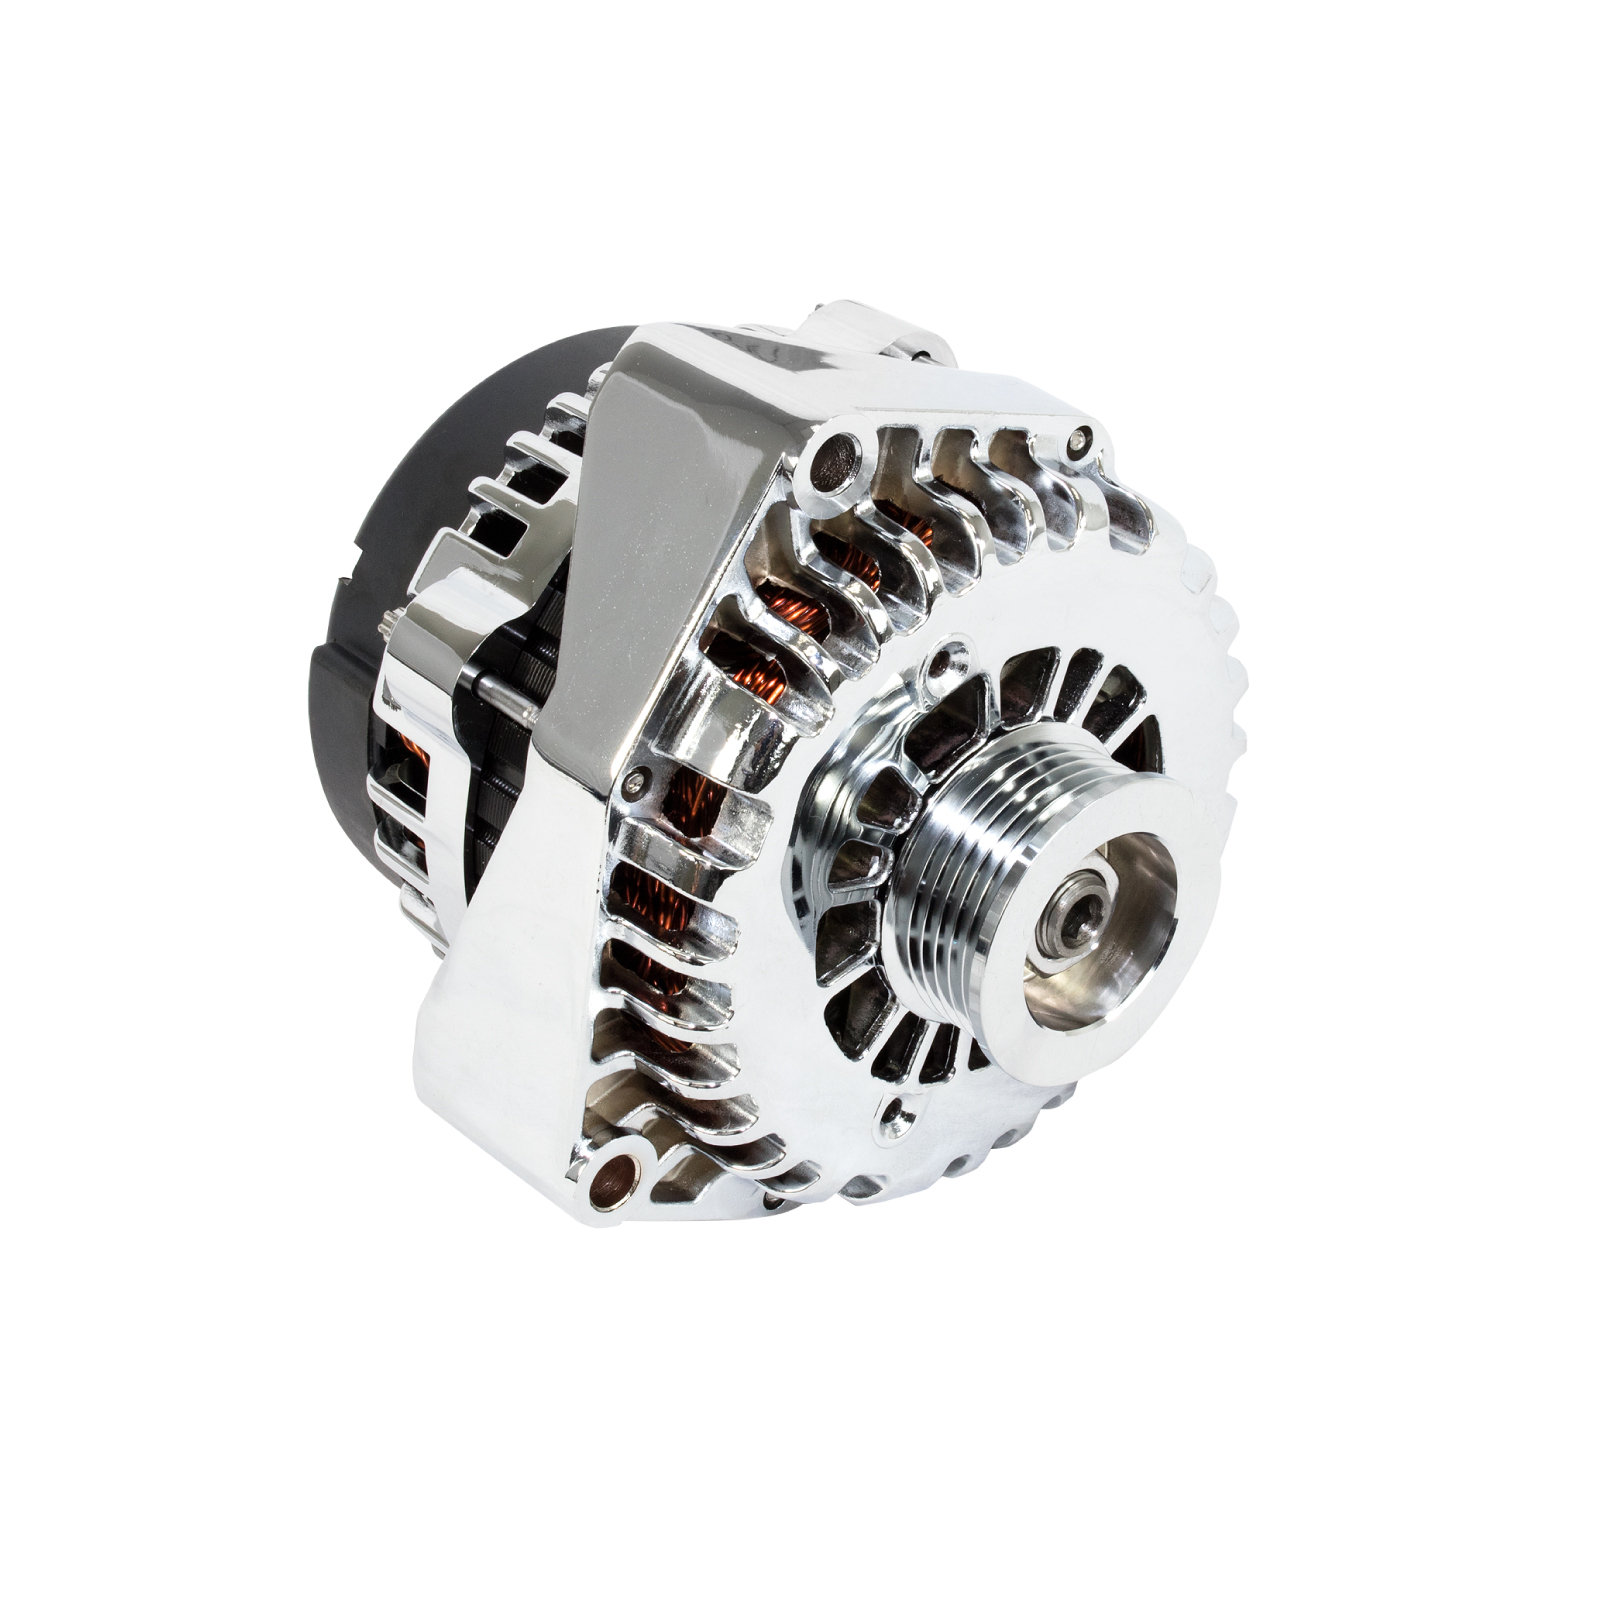 Chrome GM AD244 Style 220 Amp Alternator with Serpentine Pulley